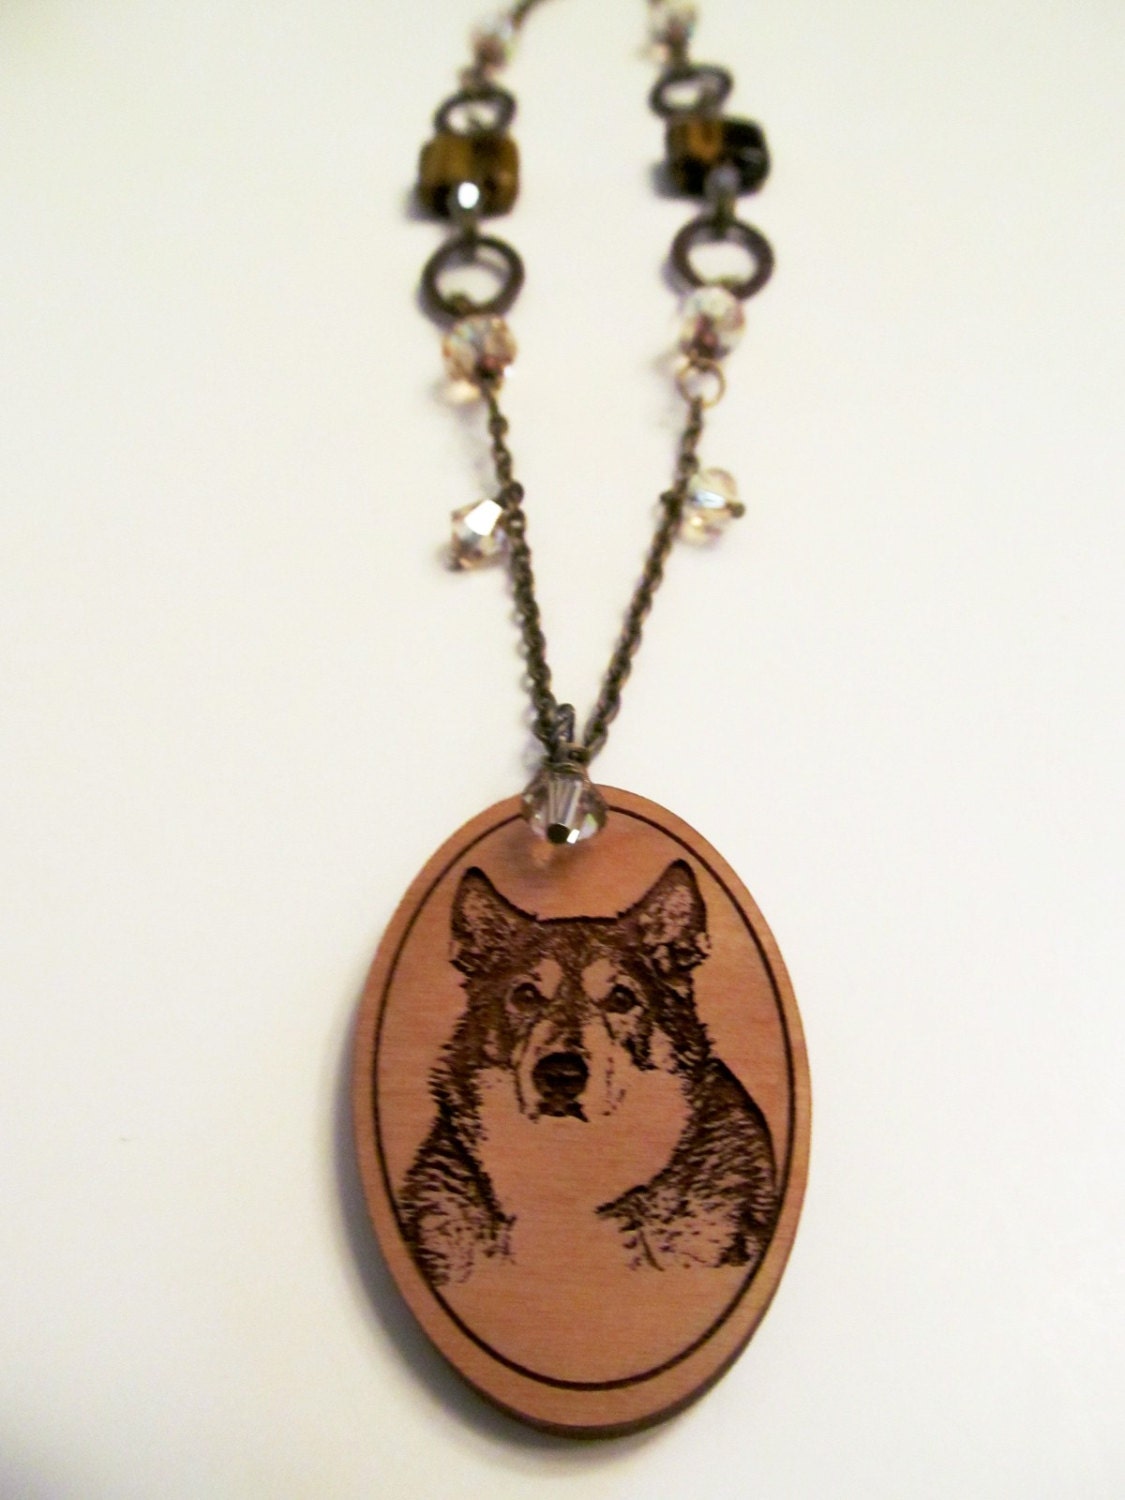 Custom Wooden Pendant Beaded Necklace Made to Order with